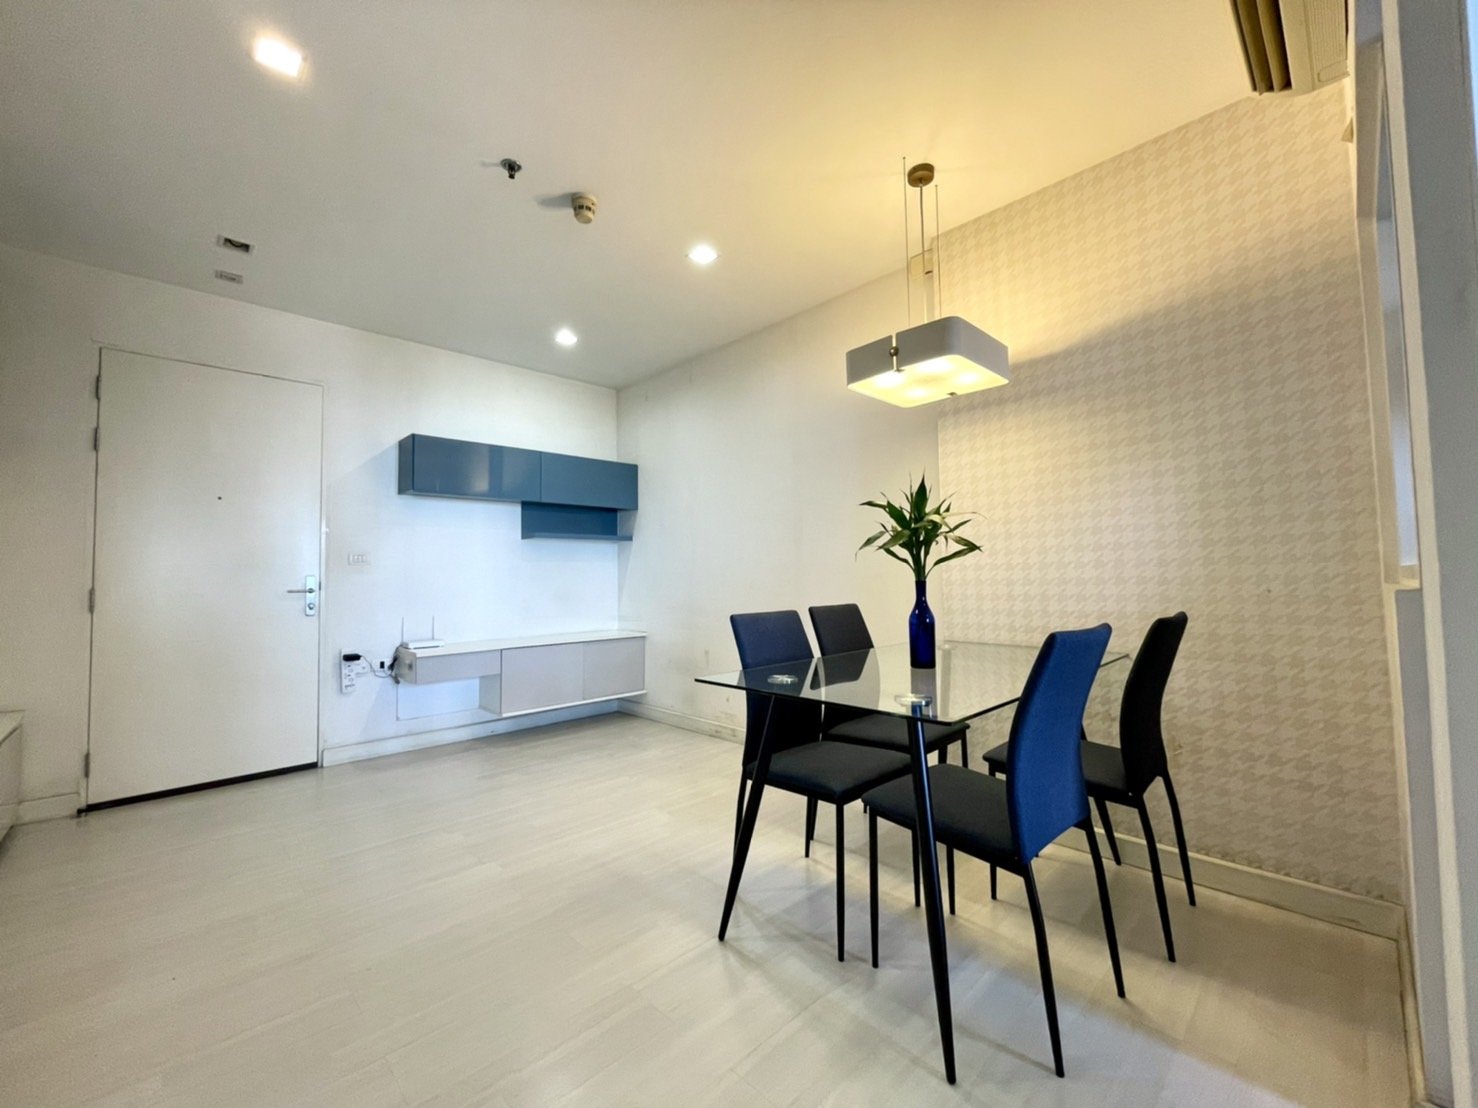 Best Price in Project!! Spacious 40.97 Sq.m Unit for sale at The Room Ratchada-Ladprao Near MRT Lat Phrao and MRT Ratchada (Yellow Line)